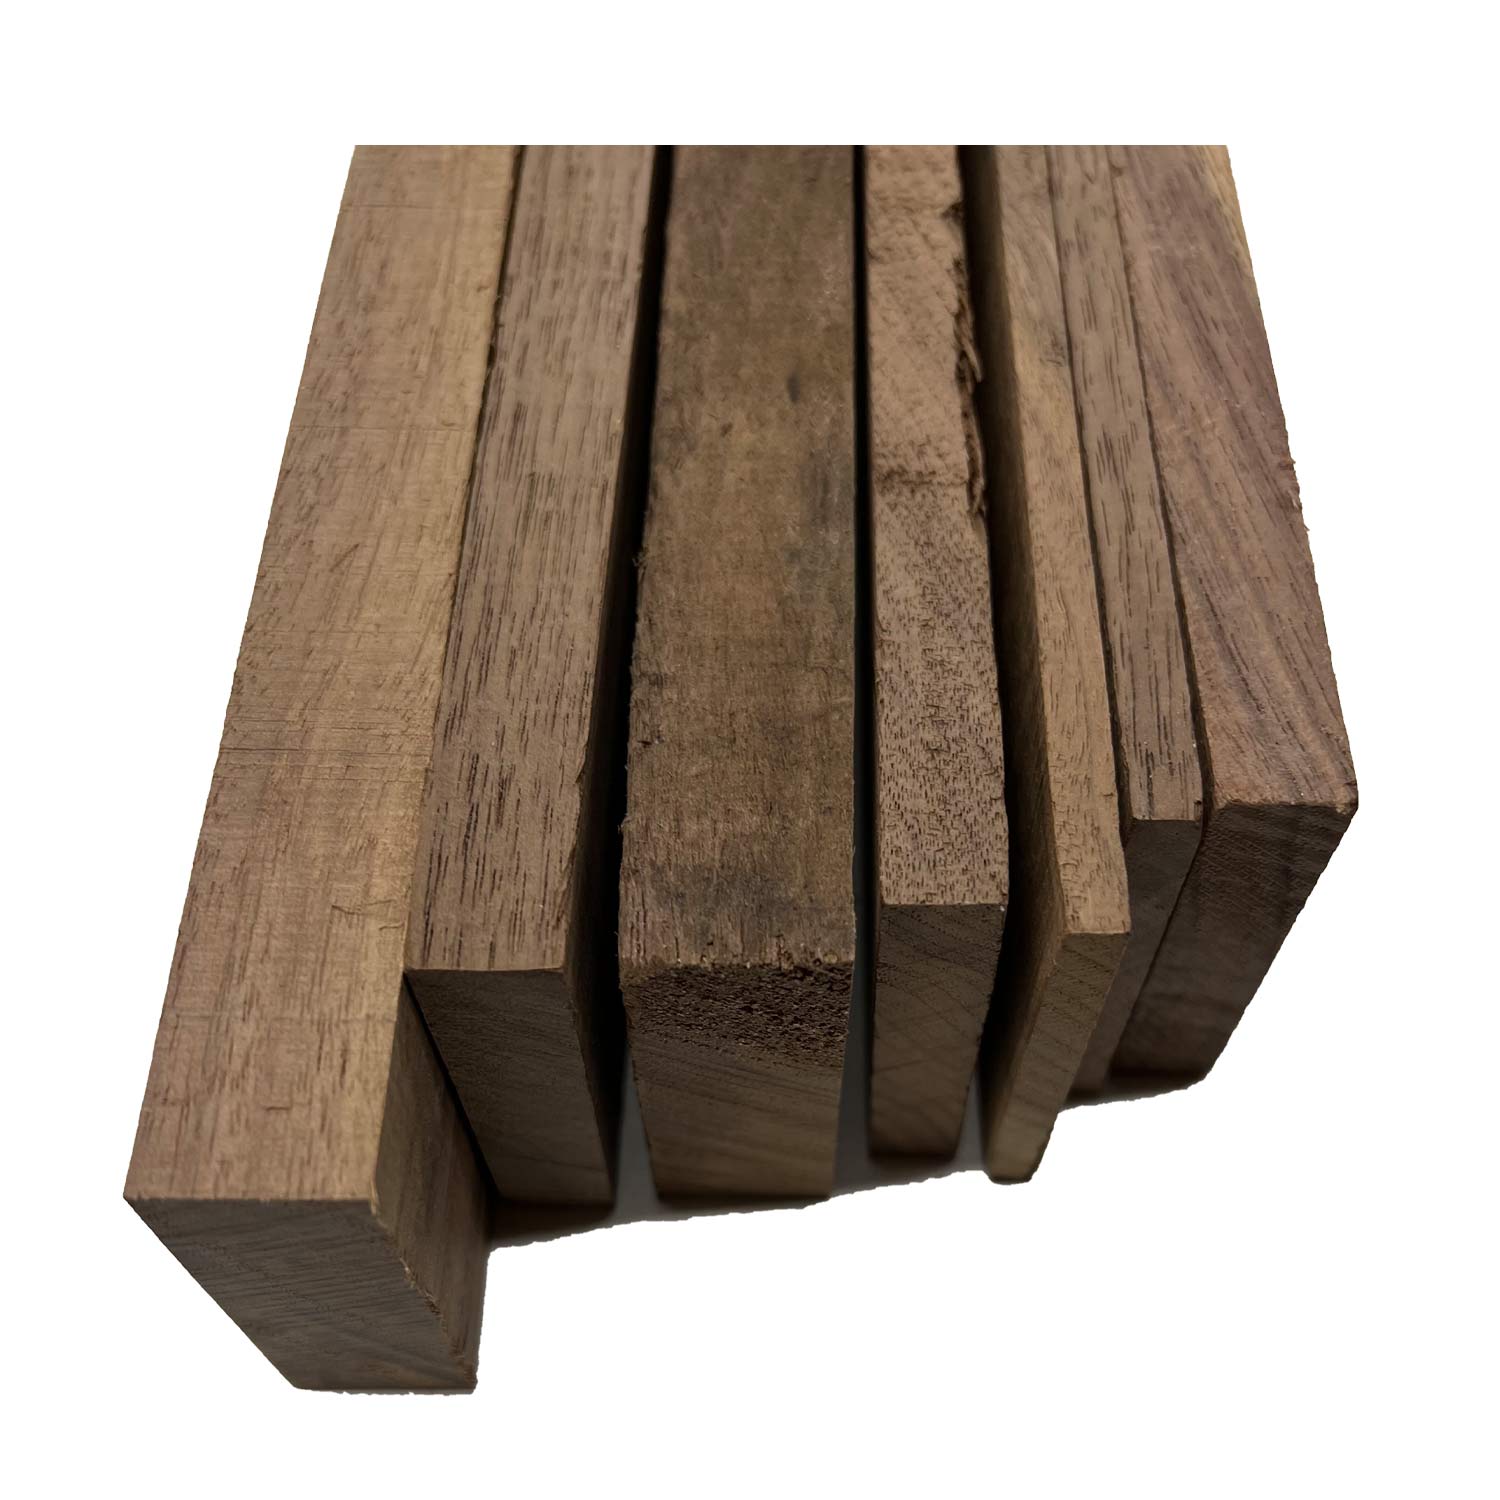 15 Pound Box of Assorted American Black Walnut Wood Cut-Offs, 2 Inch Thick  Pieces, Suitable Wood Pieces for Turning Wood Blanks, Wood Crafts and